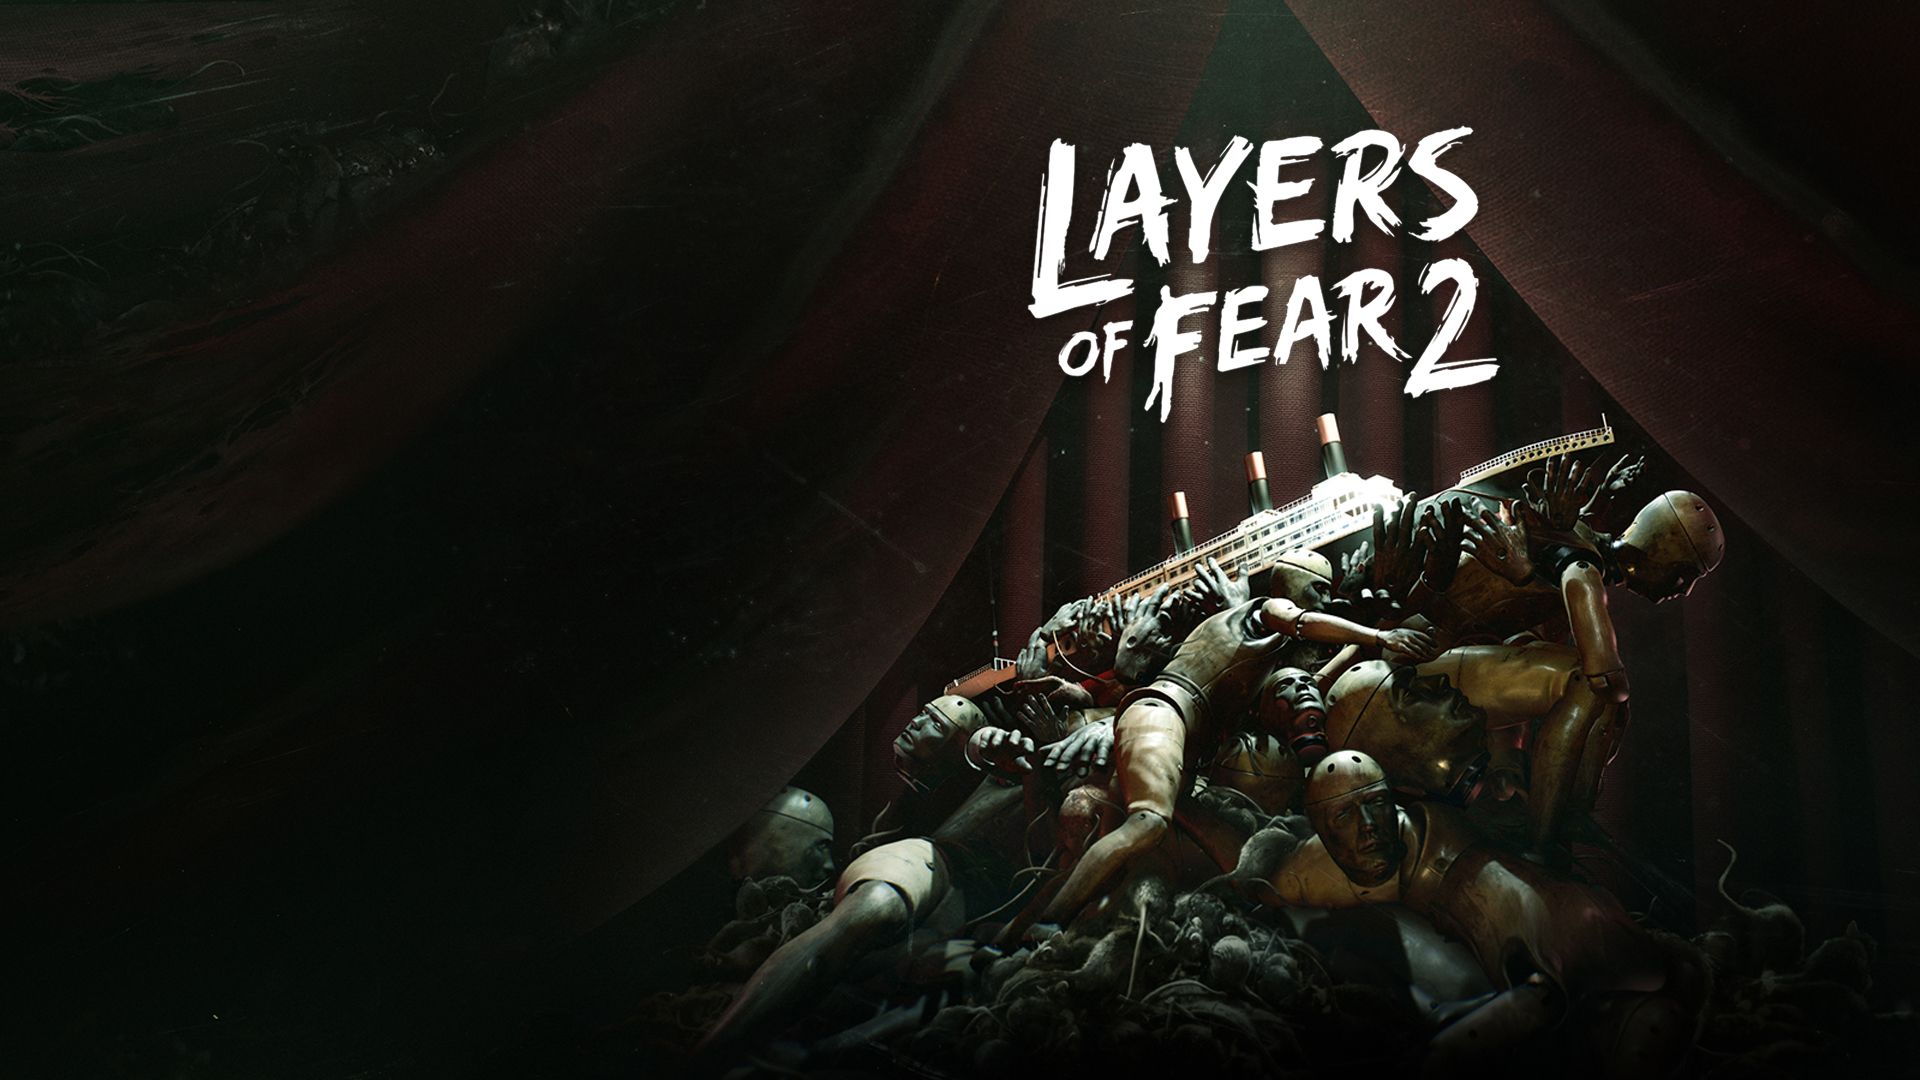 Lights, Camera, Terror!, 'Layers Of Fear 2' Review